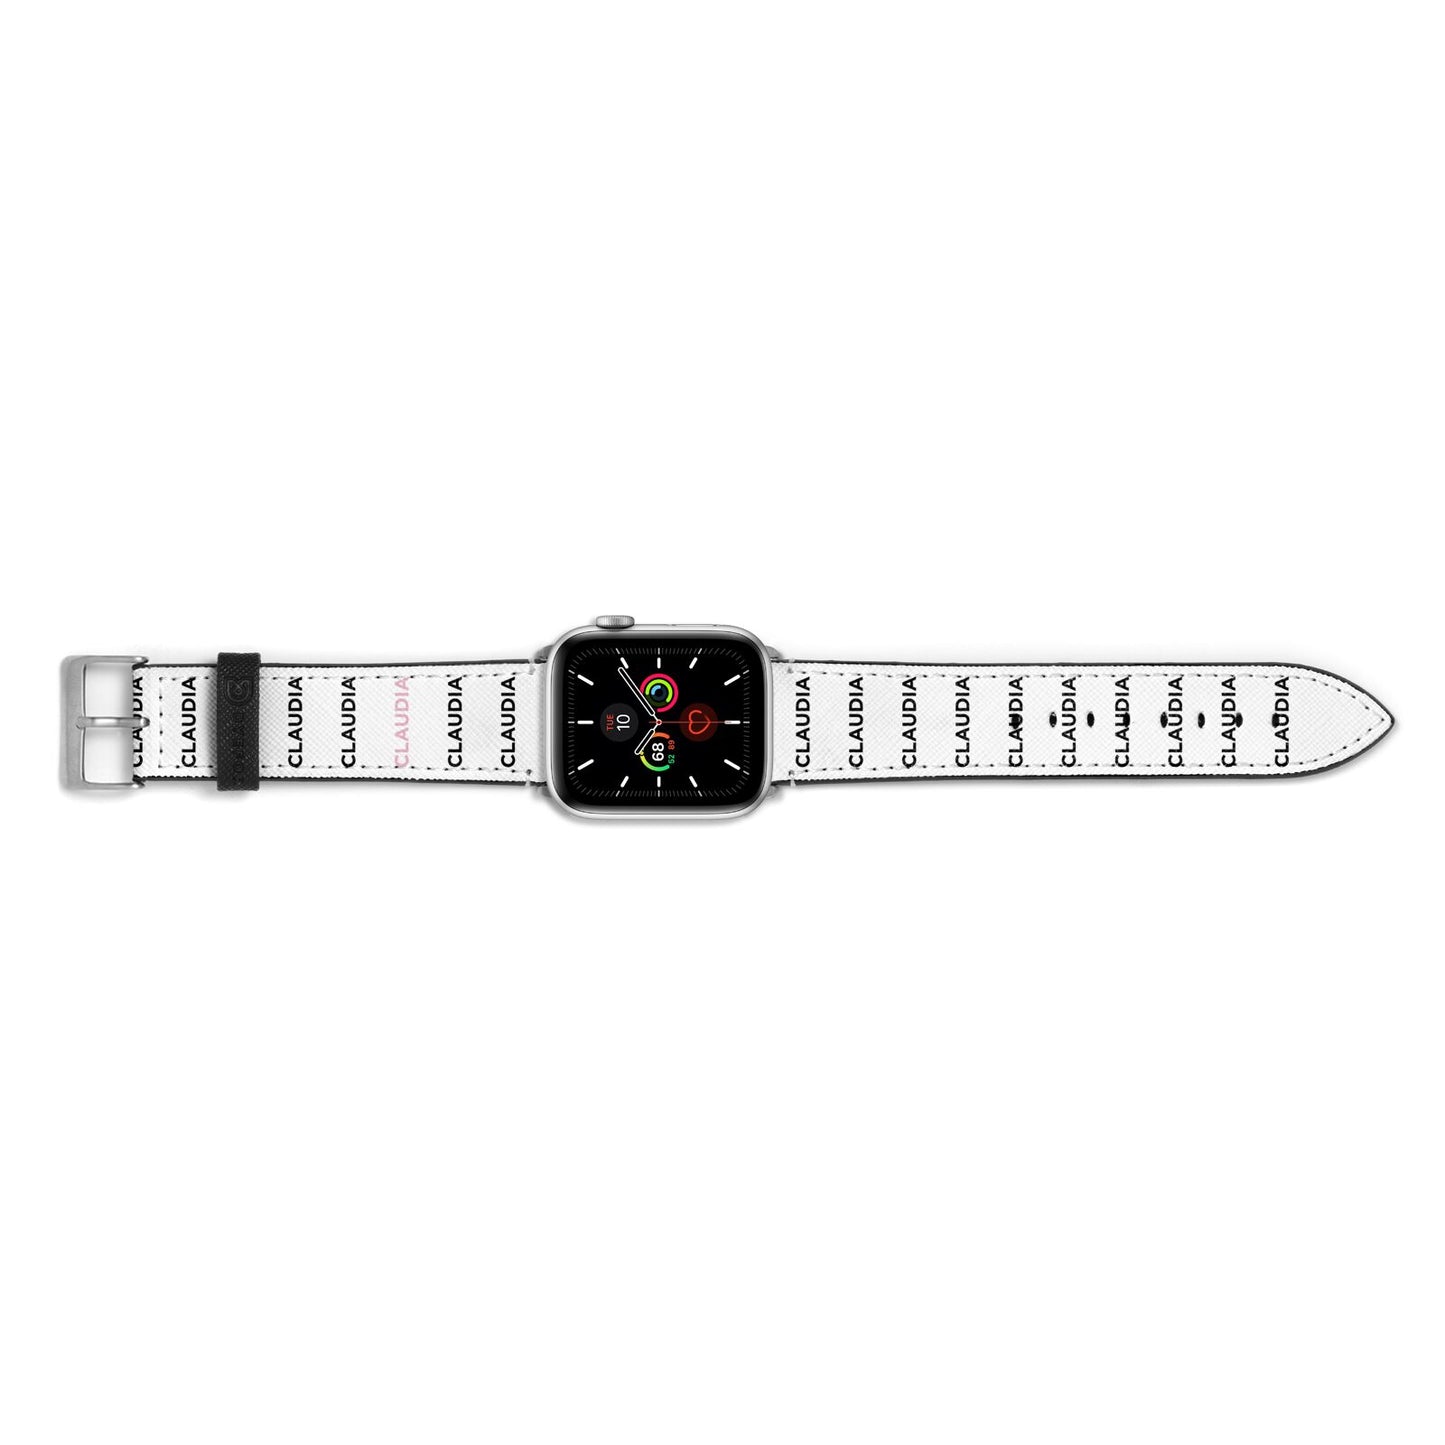 Custom Name Repeat Apple Watch Strap Landscape Image Silver Hardware